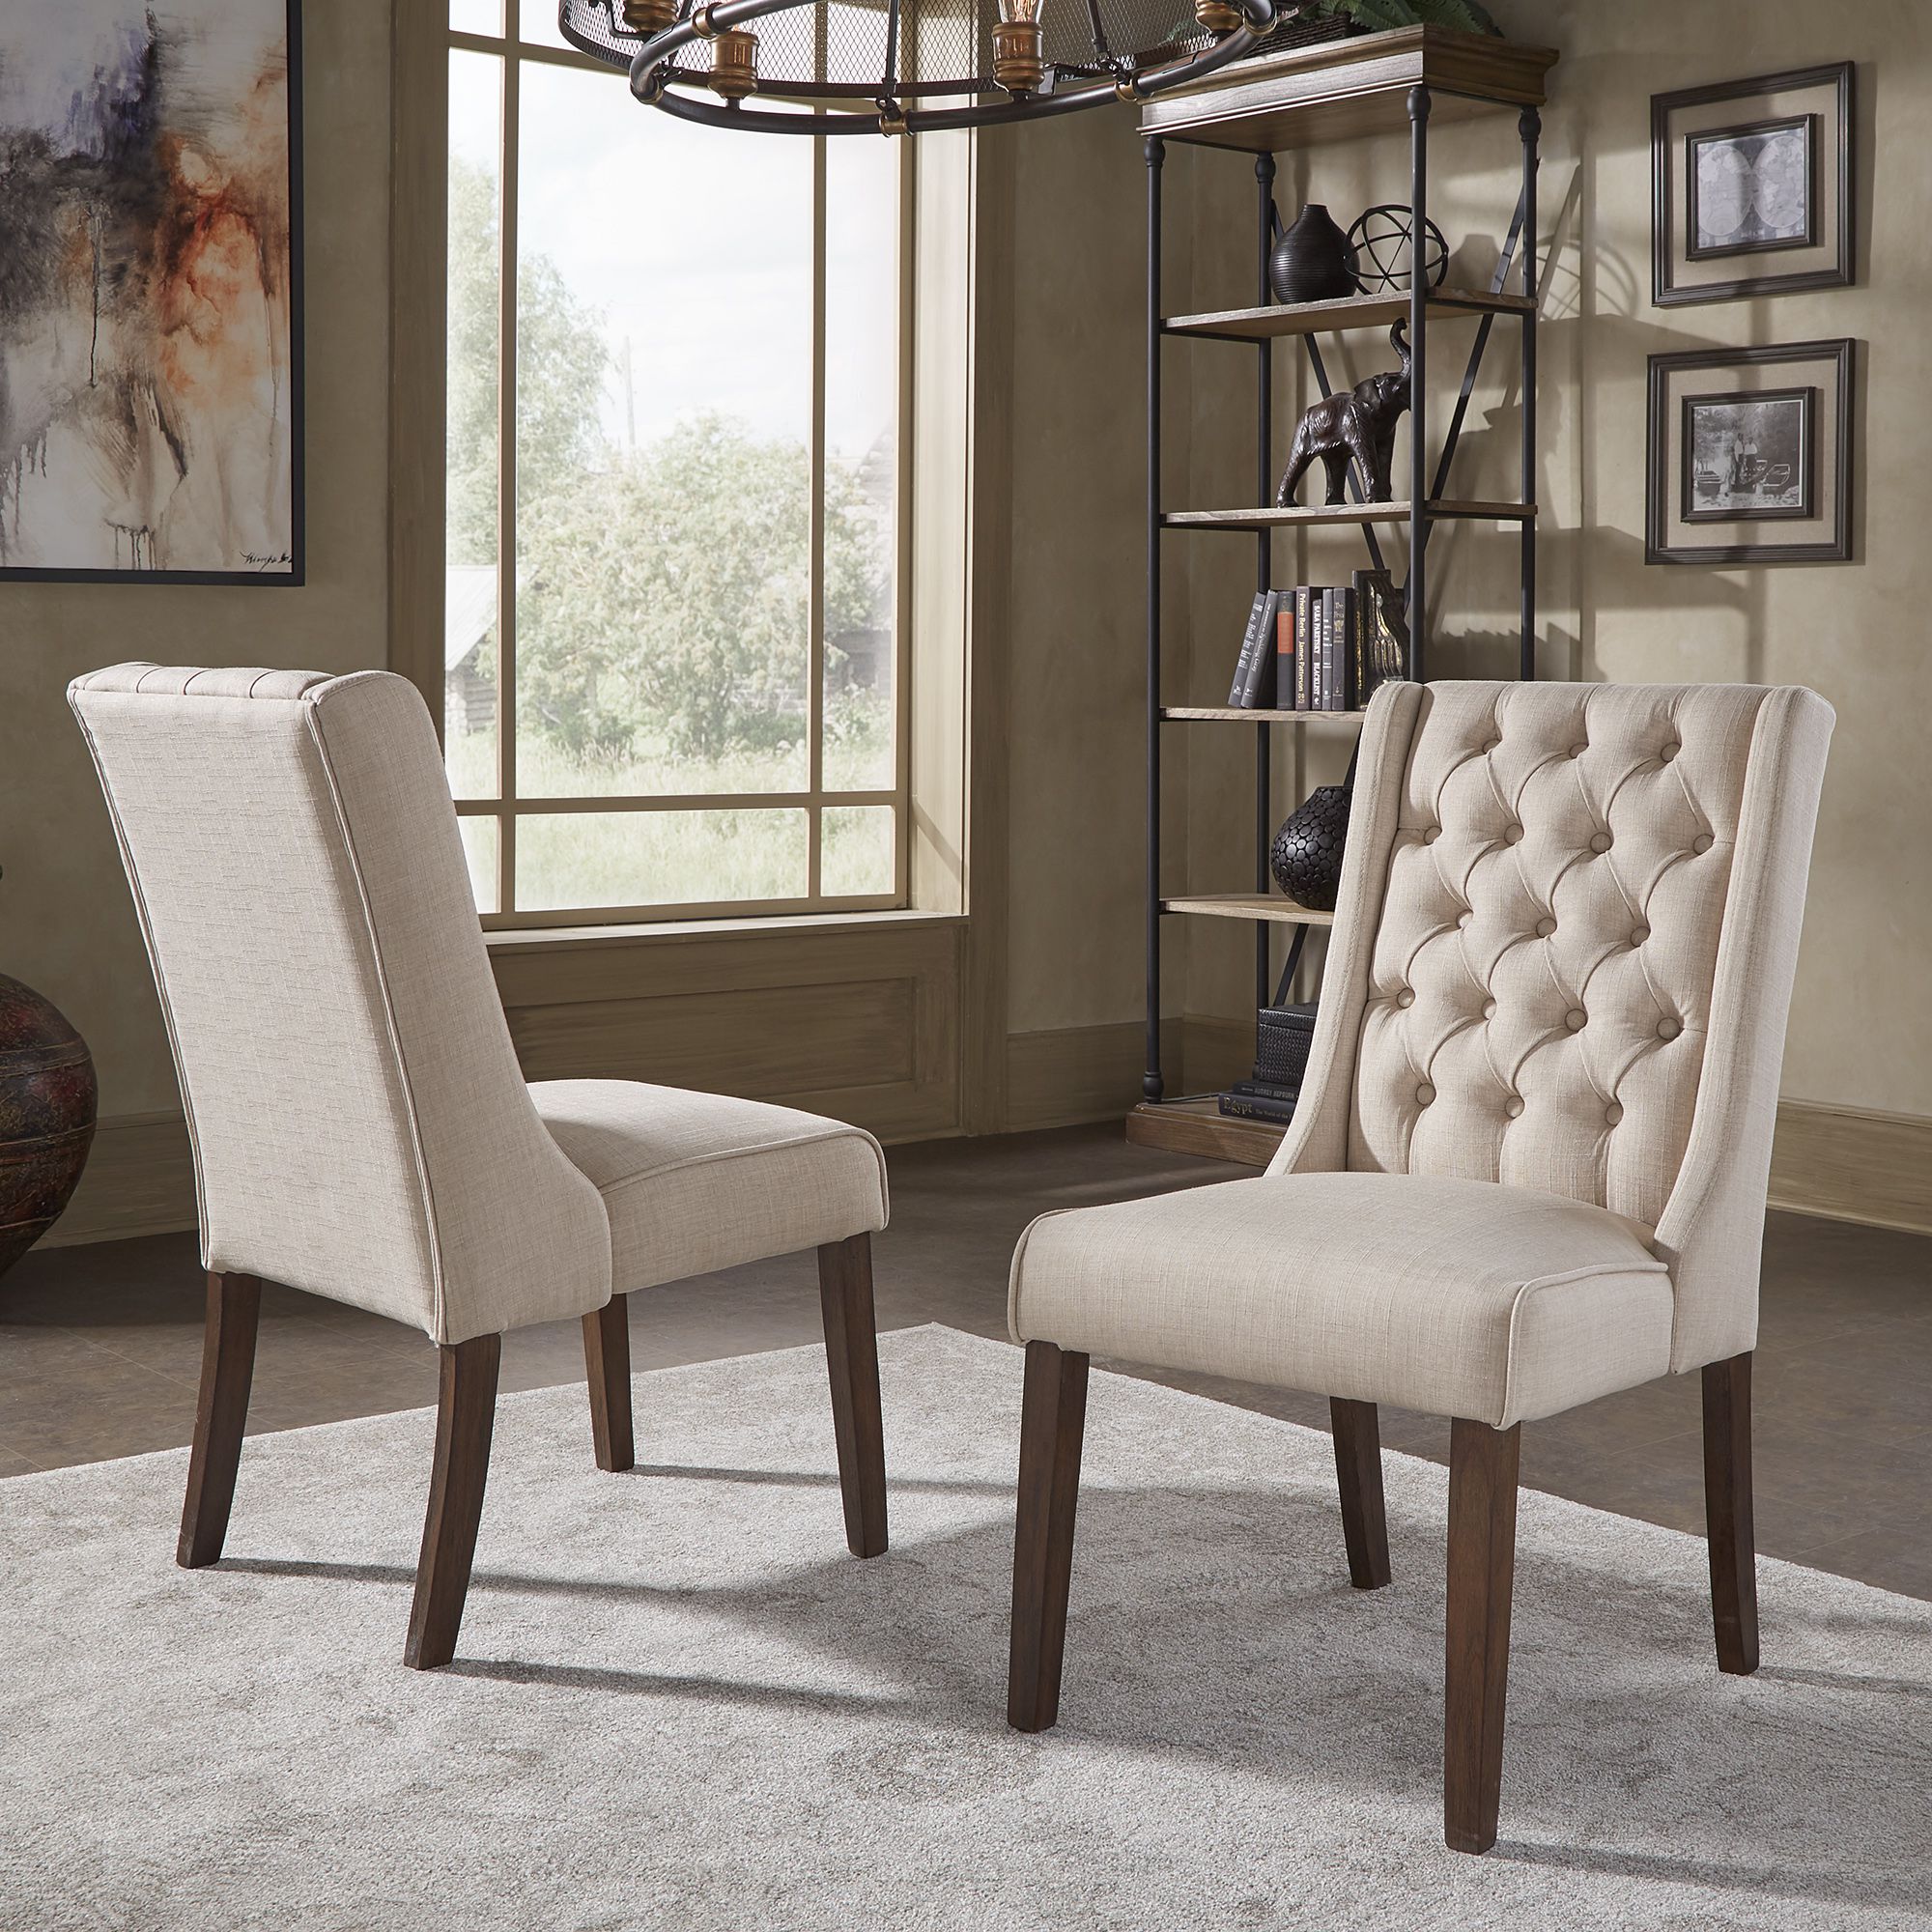 Tufted Linen Upholstered Side Chairs (Set of 2)